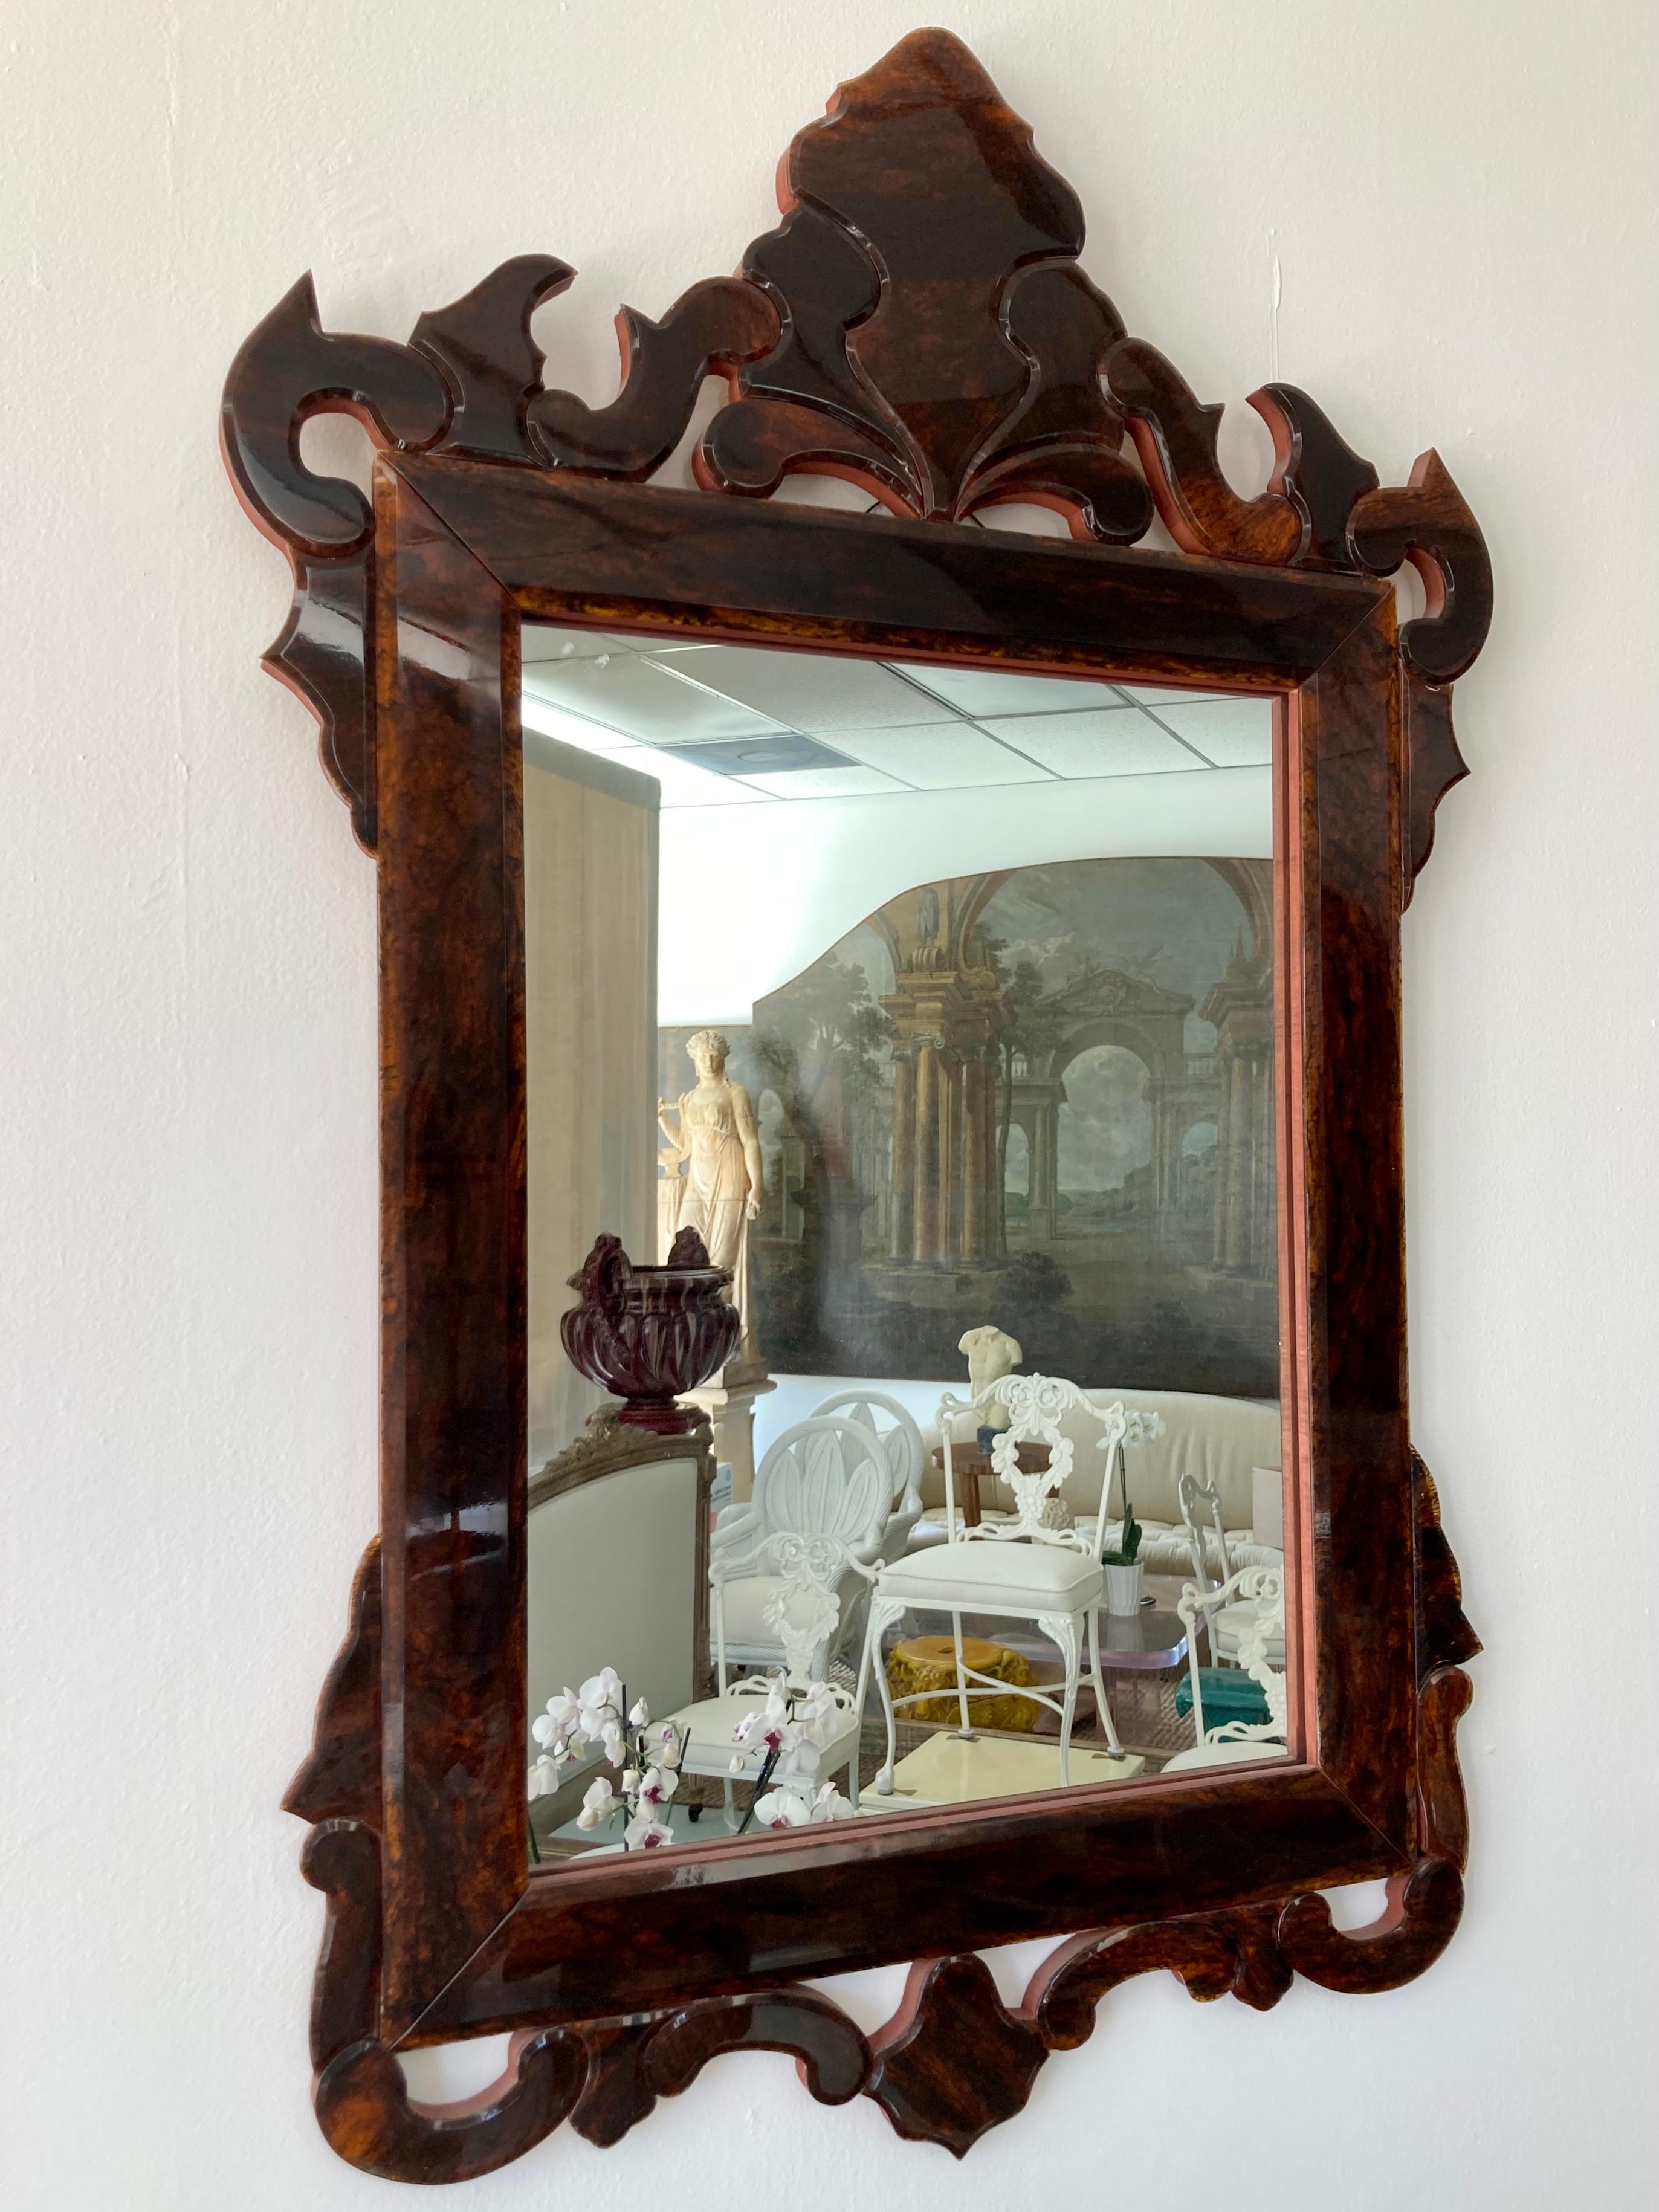 Faux tortoise glass mirror in a traditional shape and design. Each piece of the the frame is a special faux tortoise glass that is cut beveled to creat the design of the frame . Add some serious glam to your home with this fine artistry.